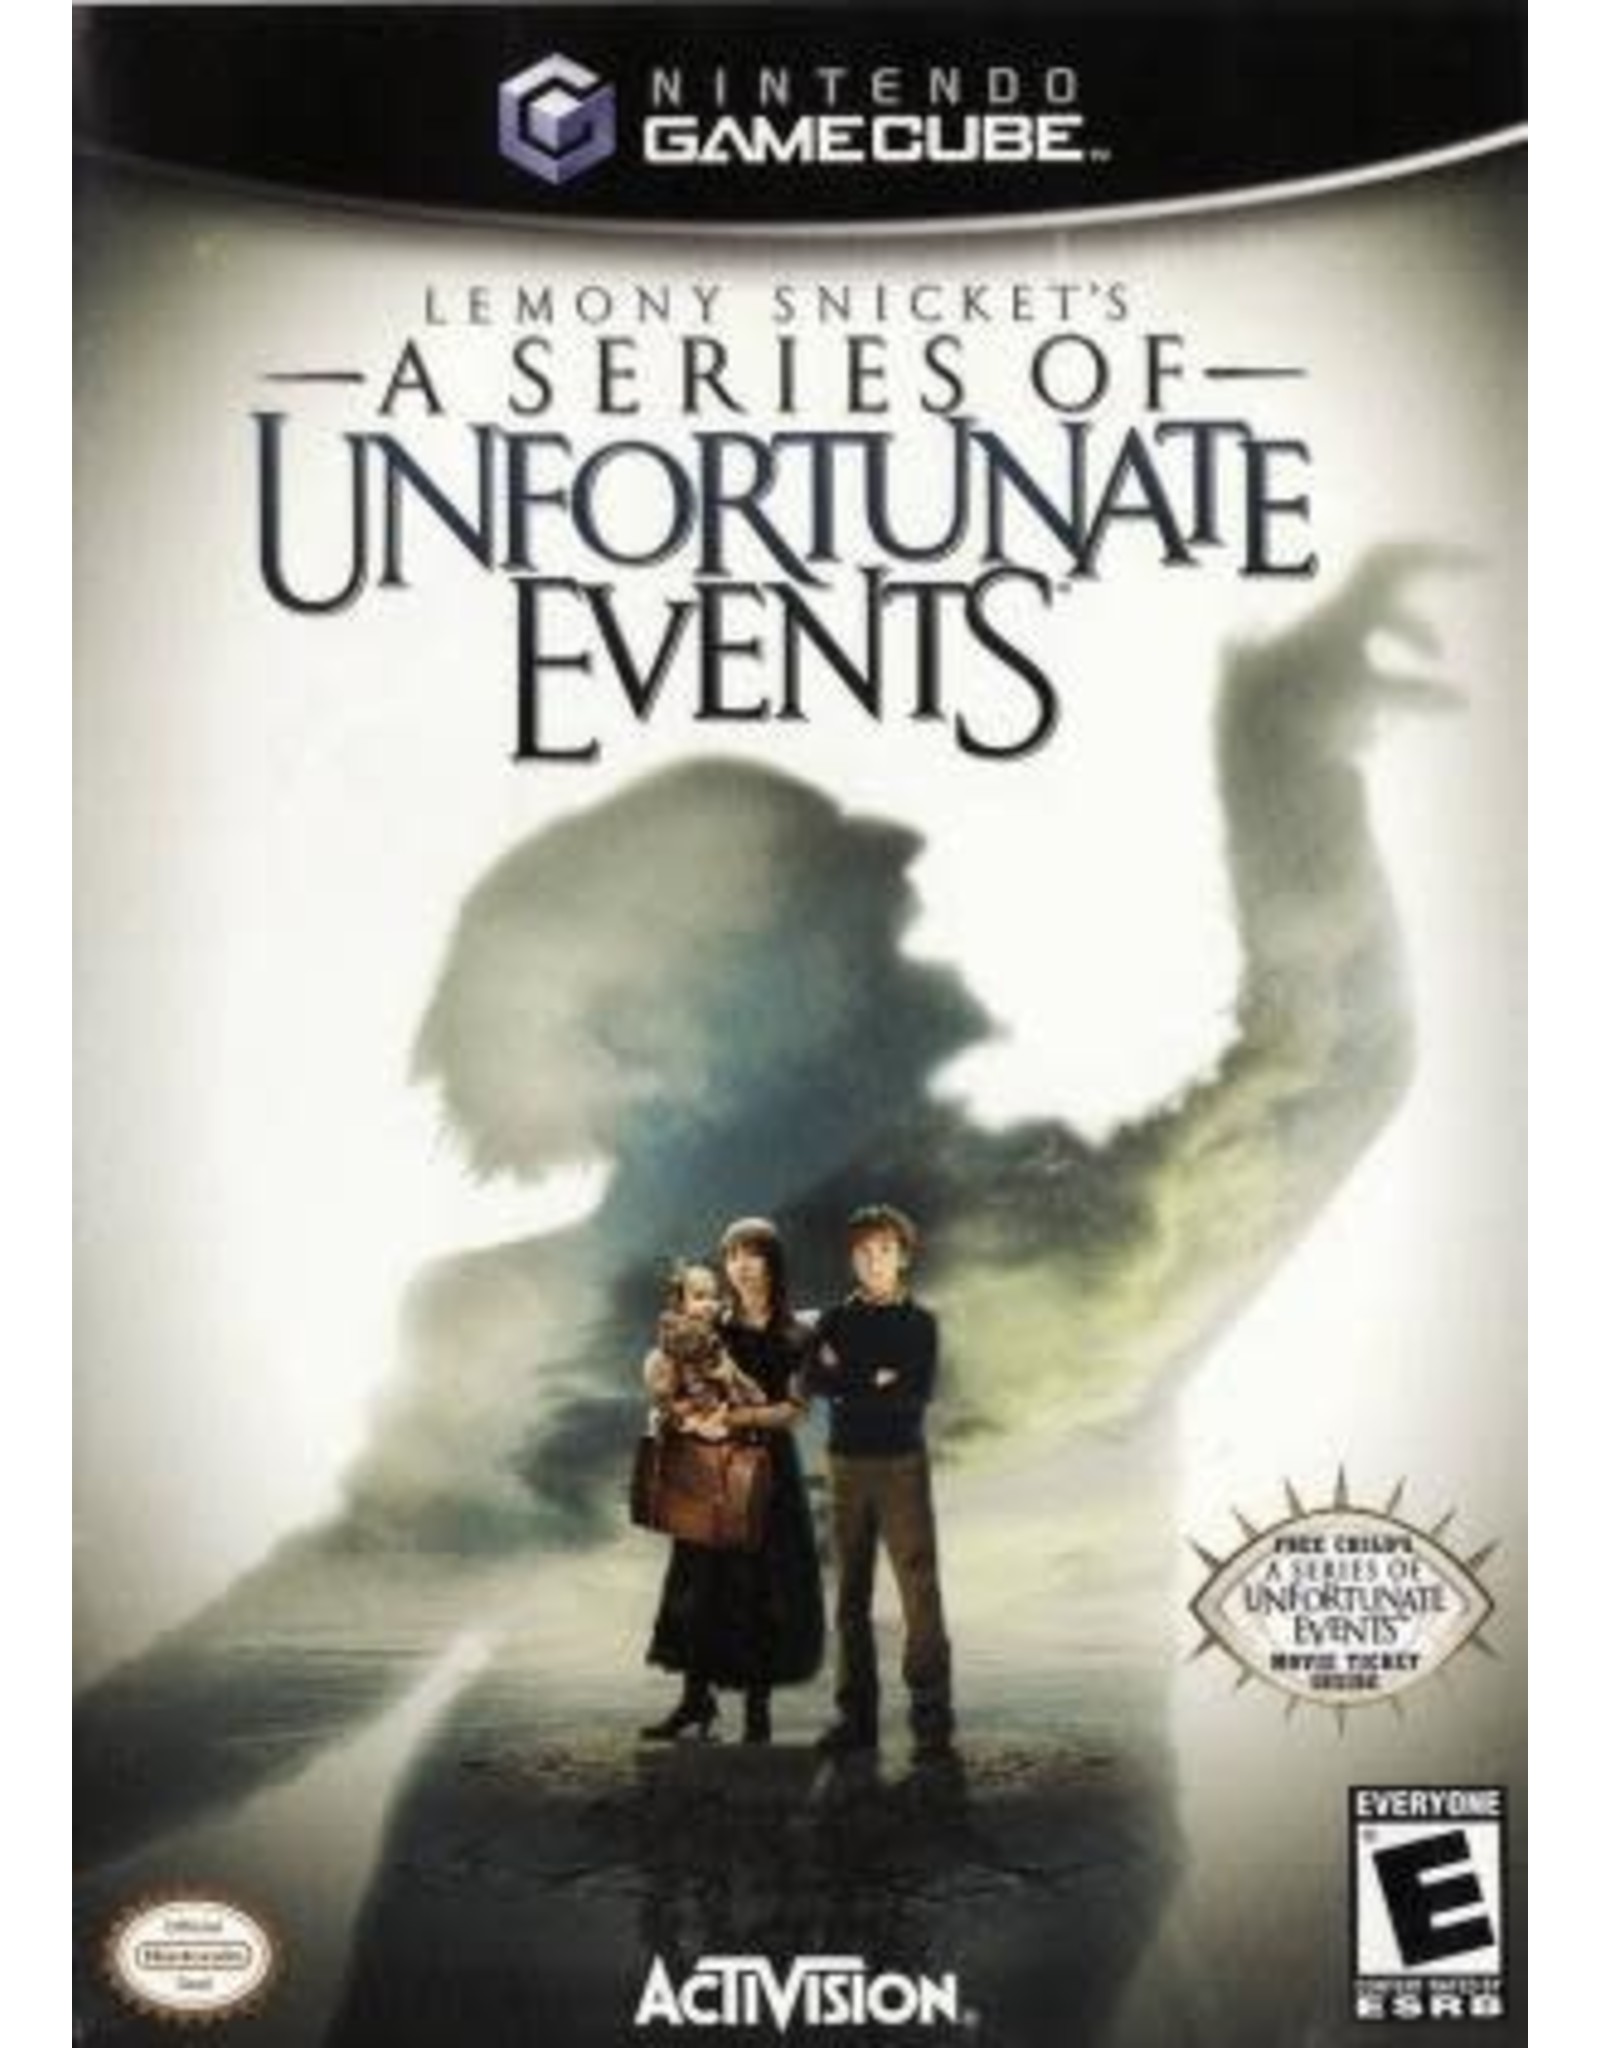 Gamecube Lemony Snicket's A Series of Unfortunate Events (CiB)